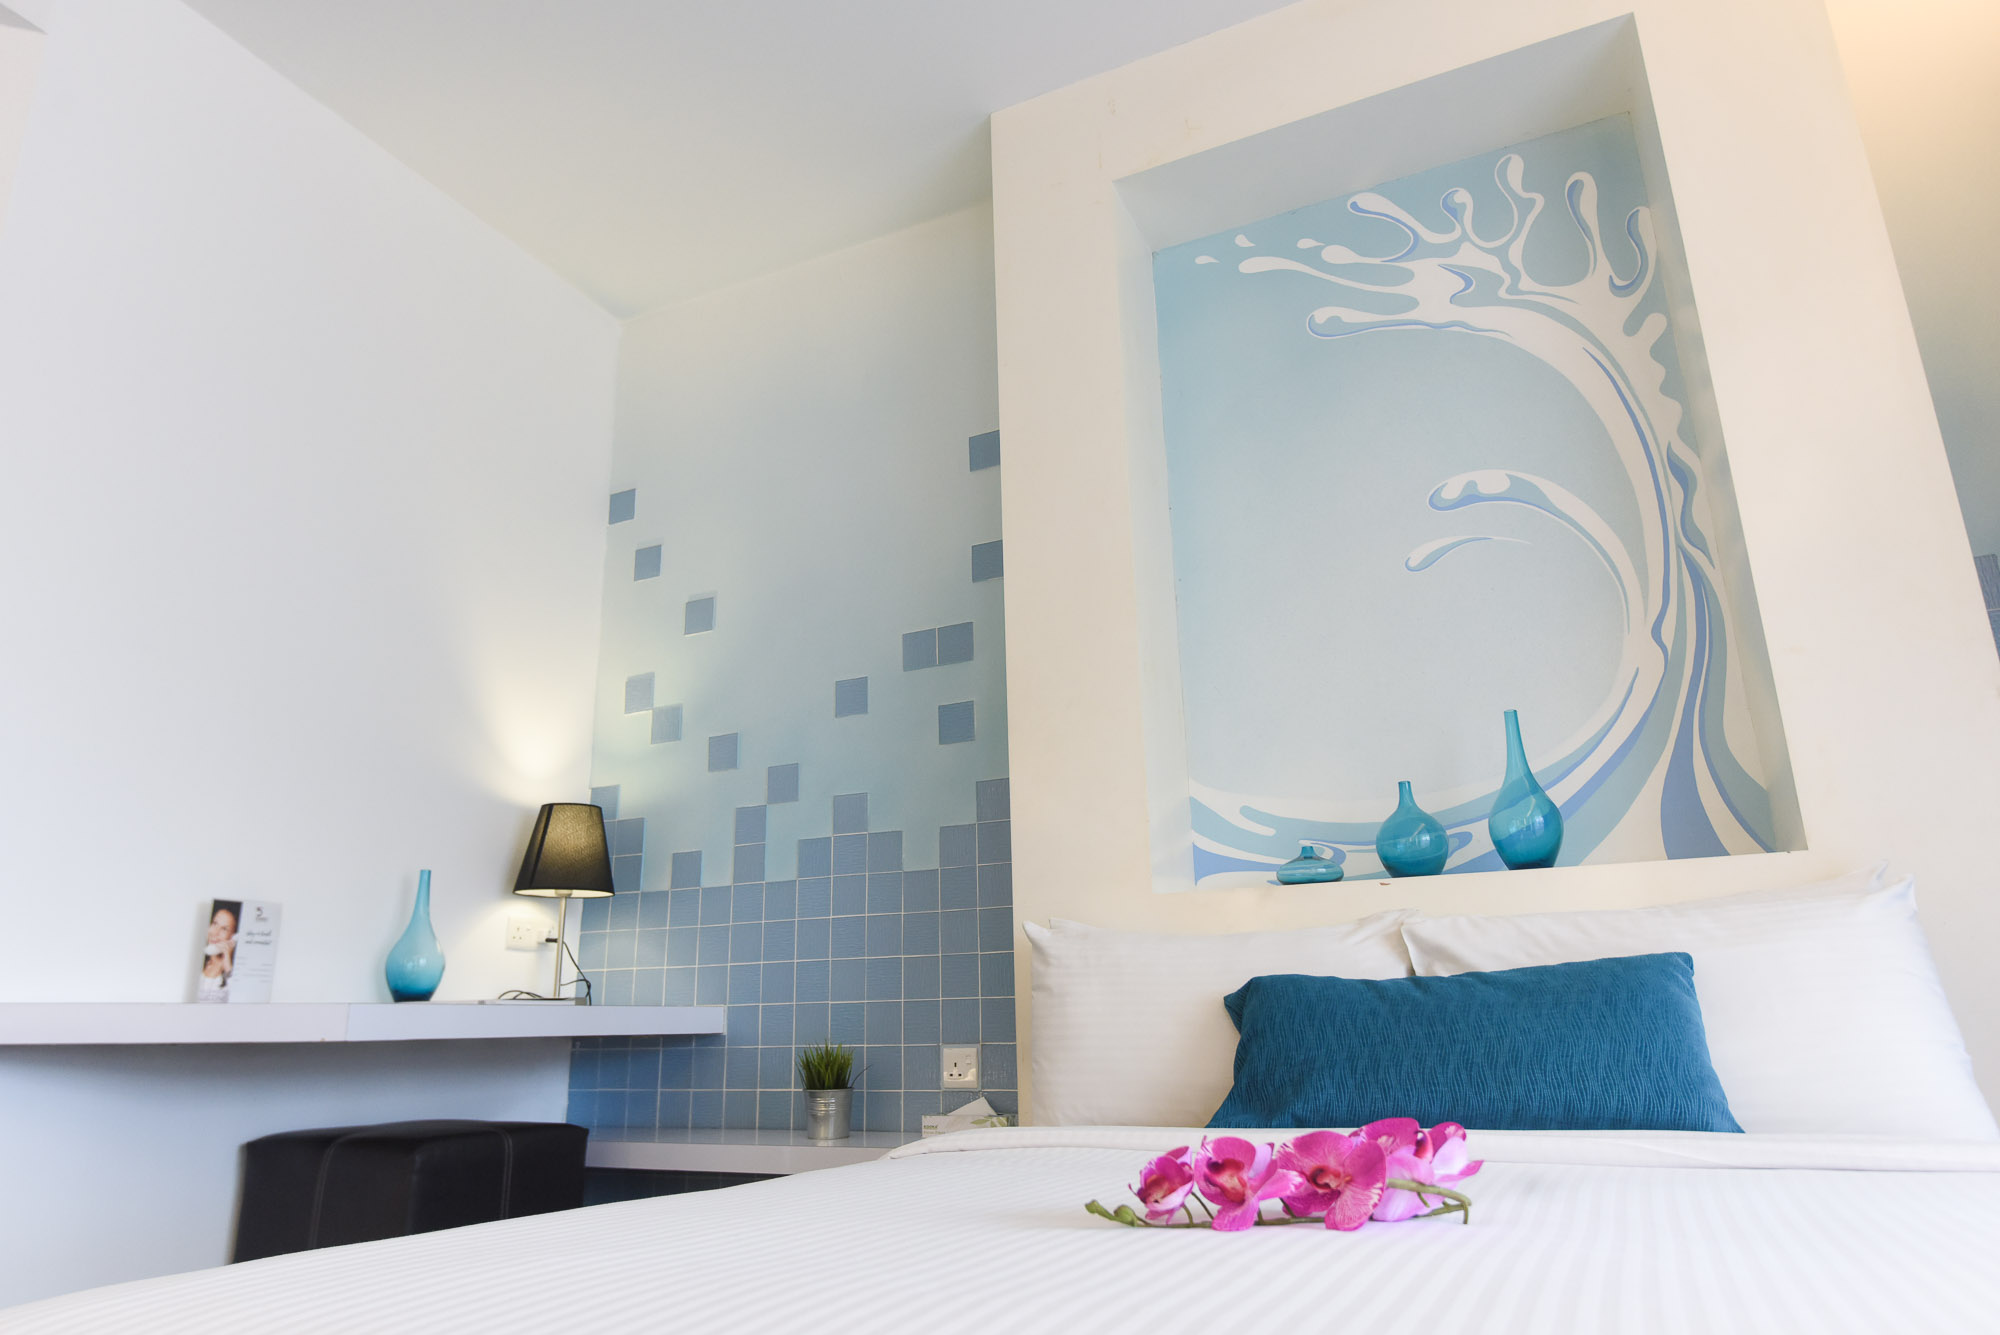 Step into the serene water inspired Water Suite. Be calm as water as you rest yourself in this room filled with amenities such as air-conditioned, shower facilities, complimentary WiFi, in-room safe and many more